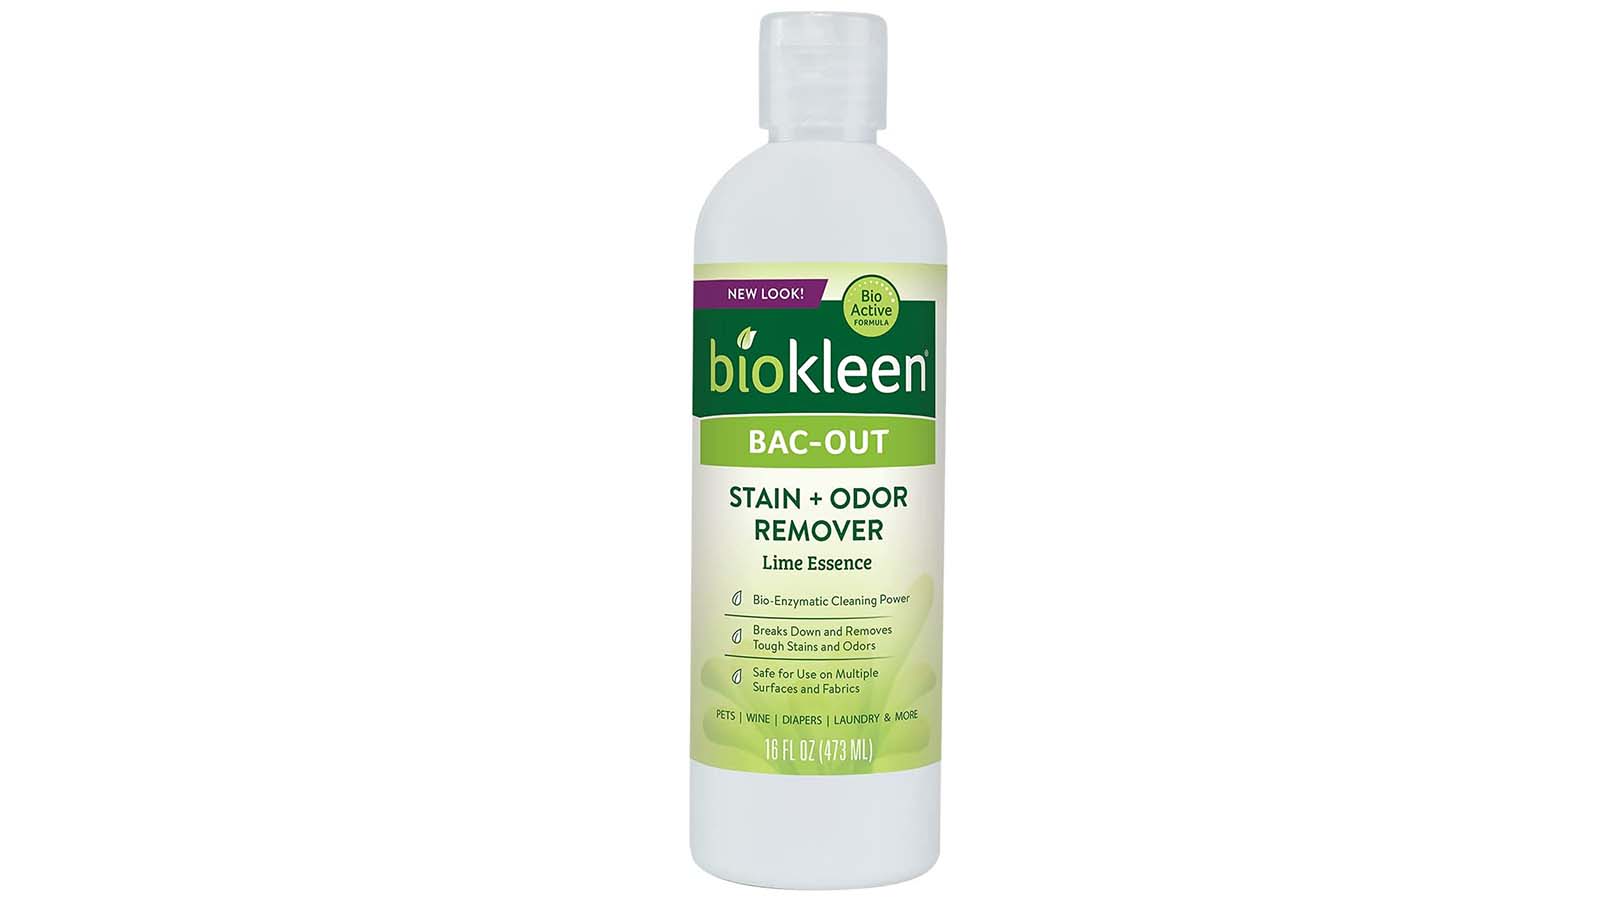 Bac-Out Carpet Stain + Odor Remover - 16 Fl Oz